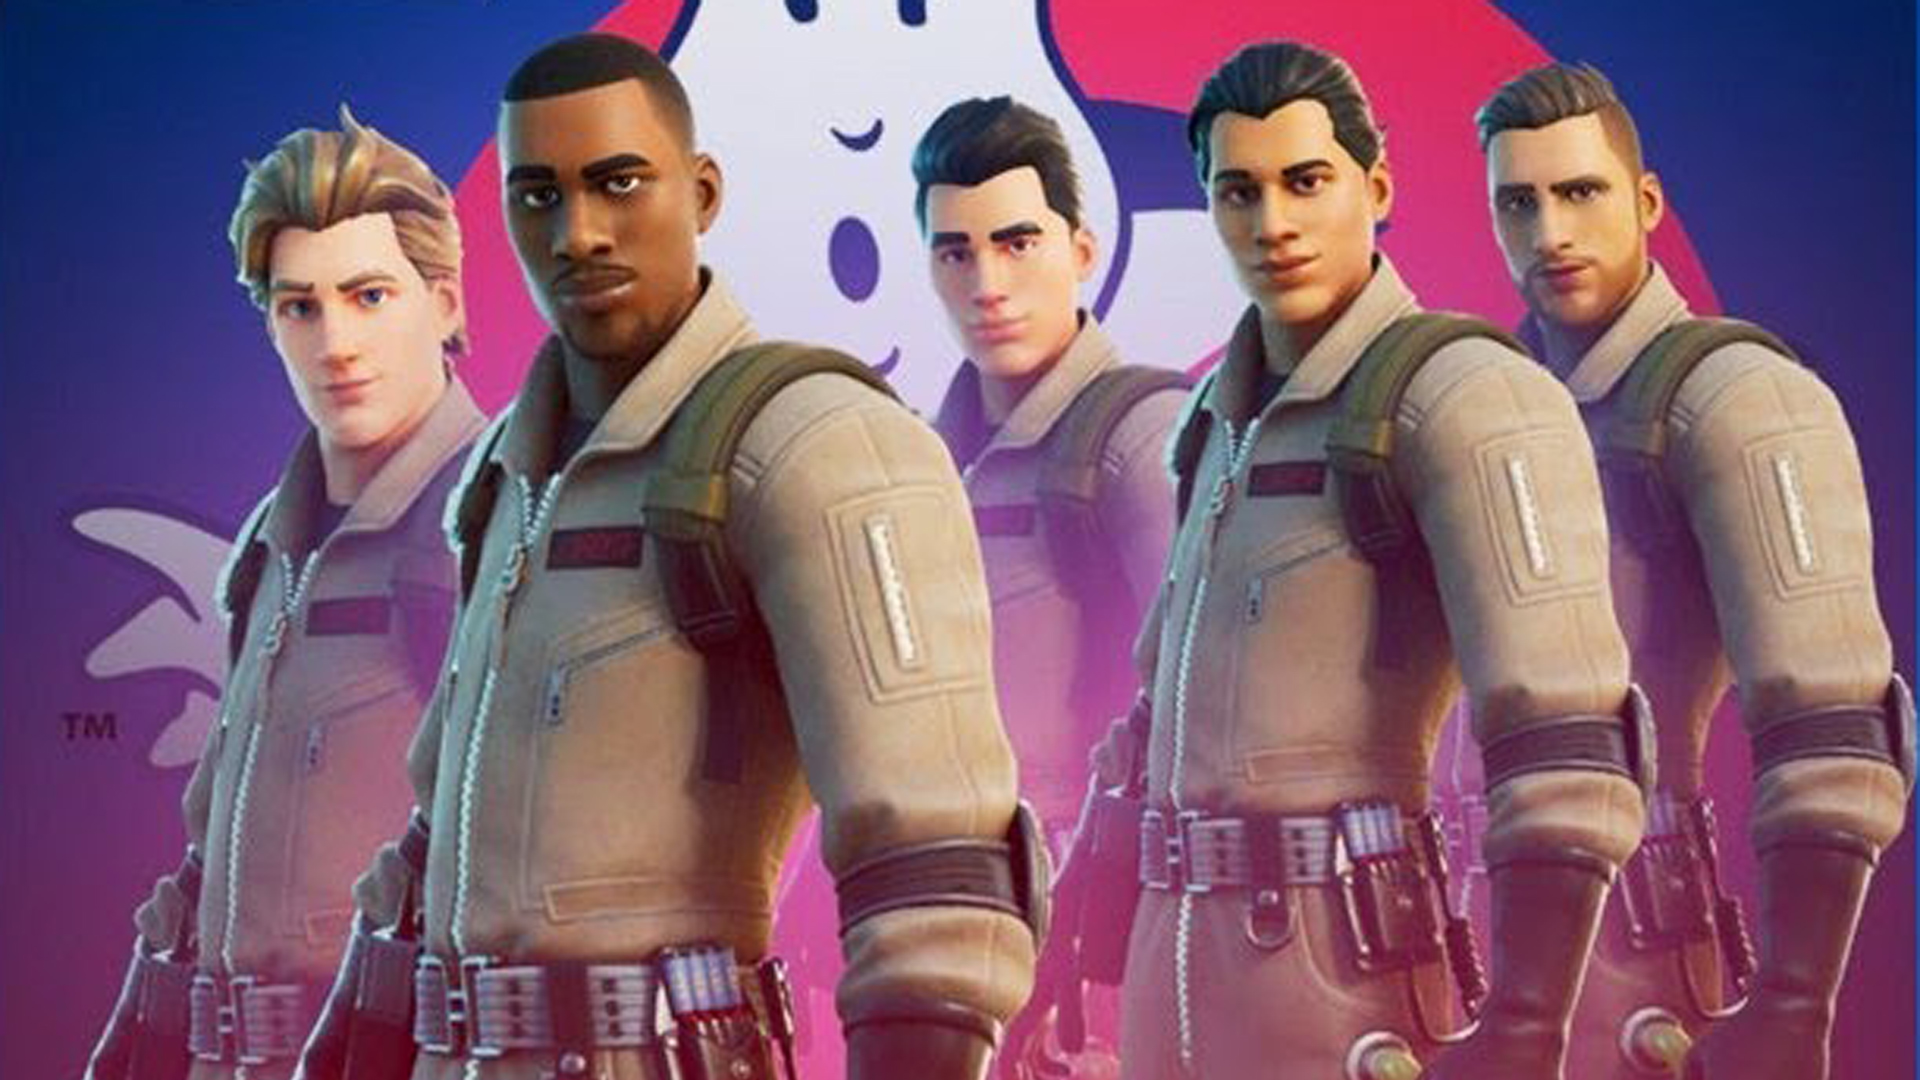 Fortnite Ghostbusters 2021 crossover quests, skins coming this month